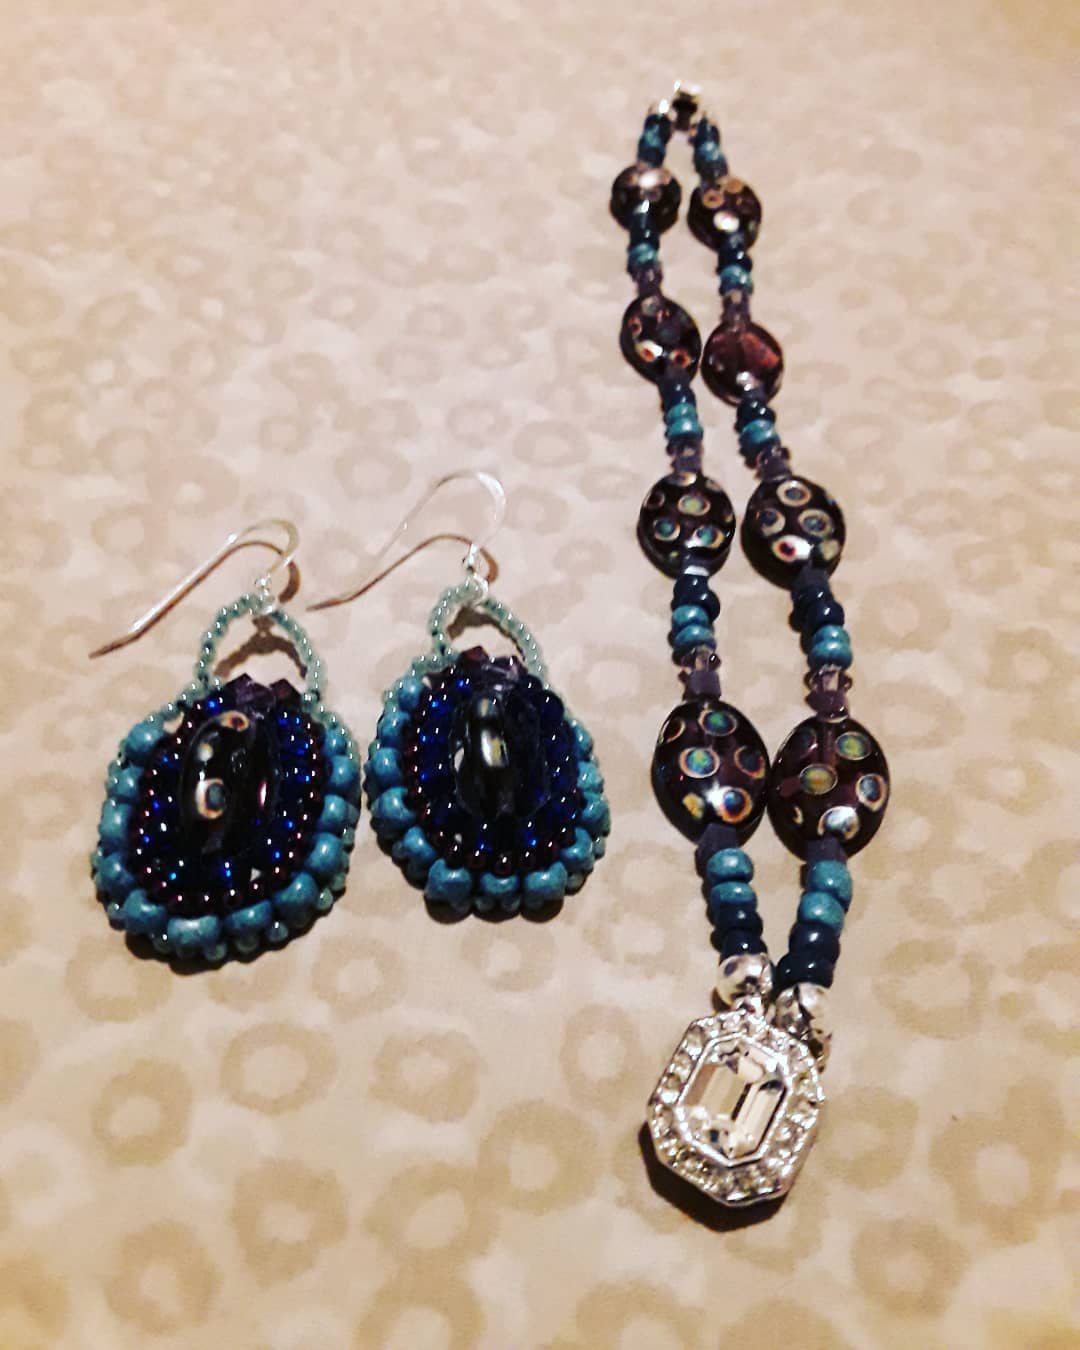 Bead Earrings and Necklace